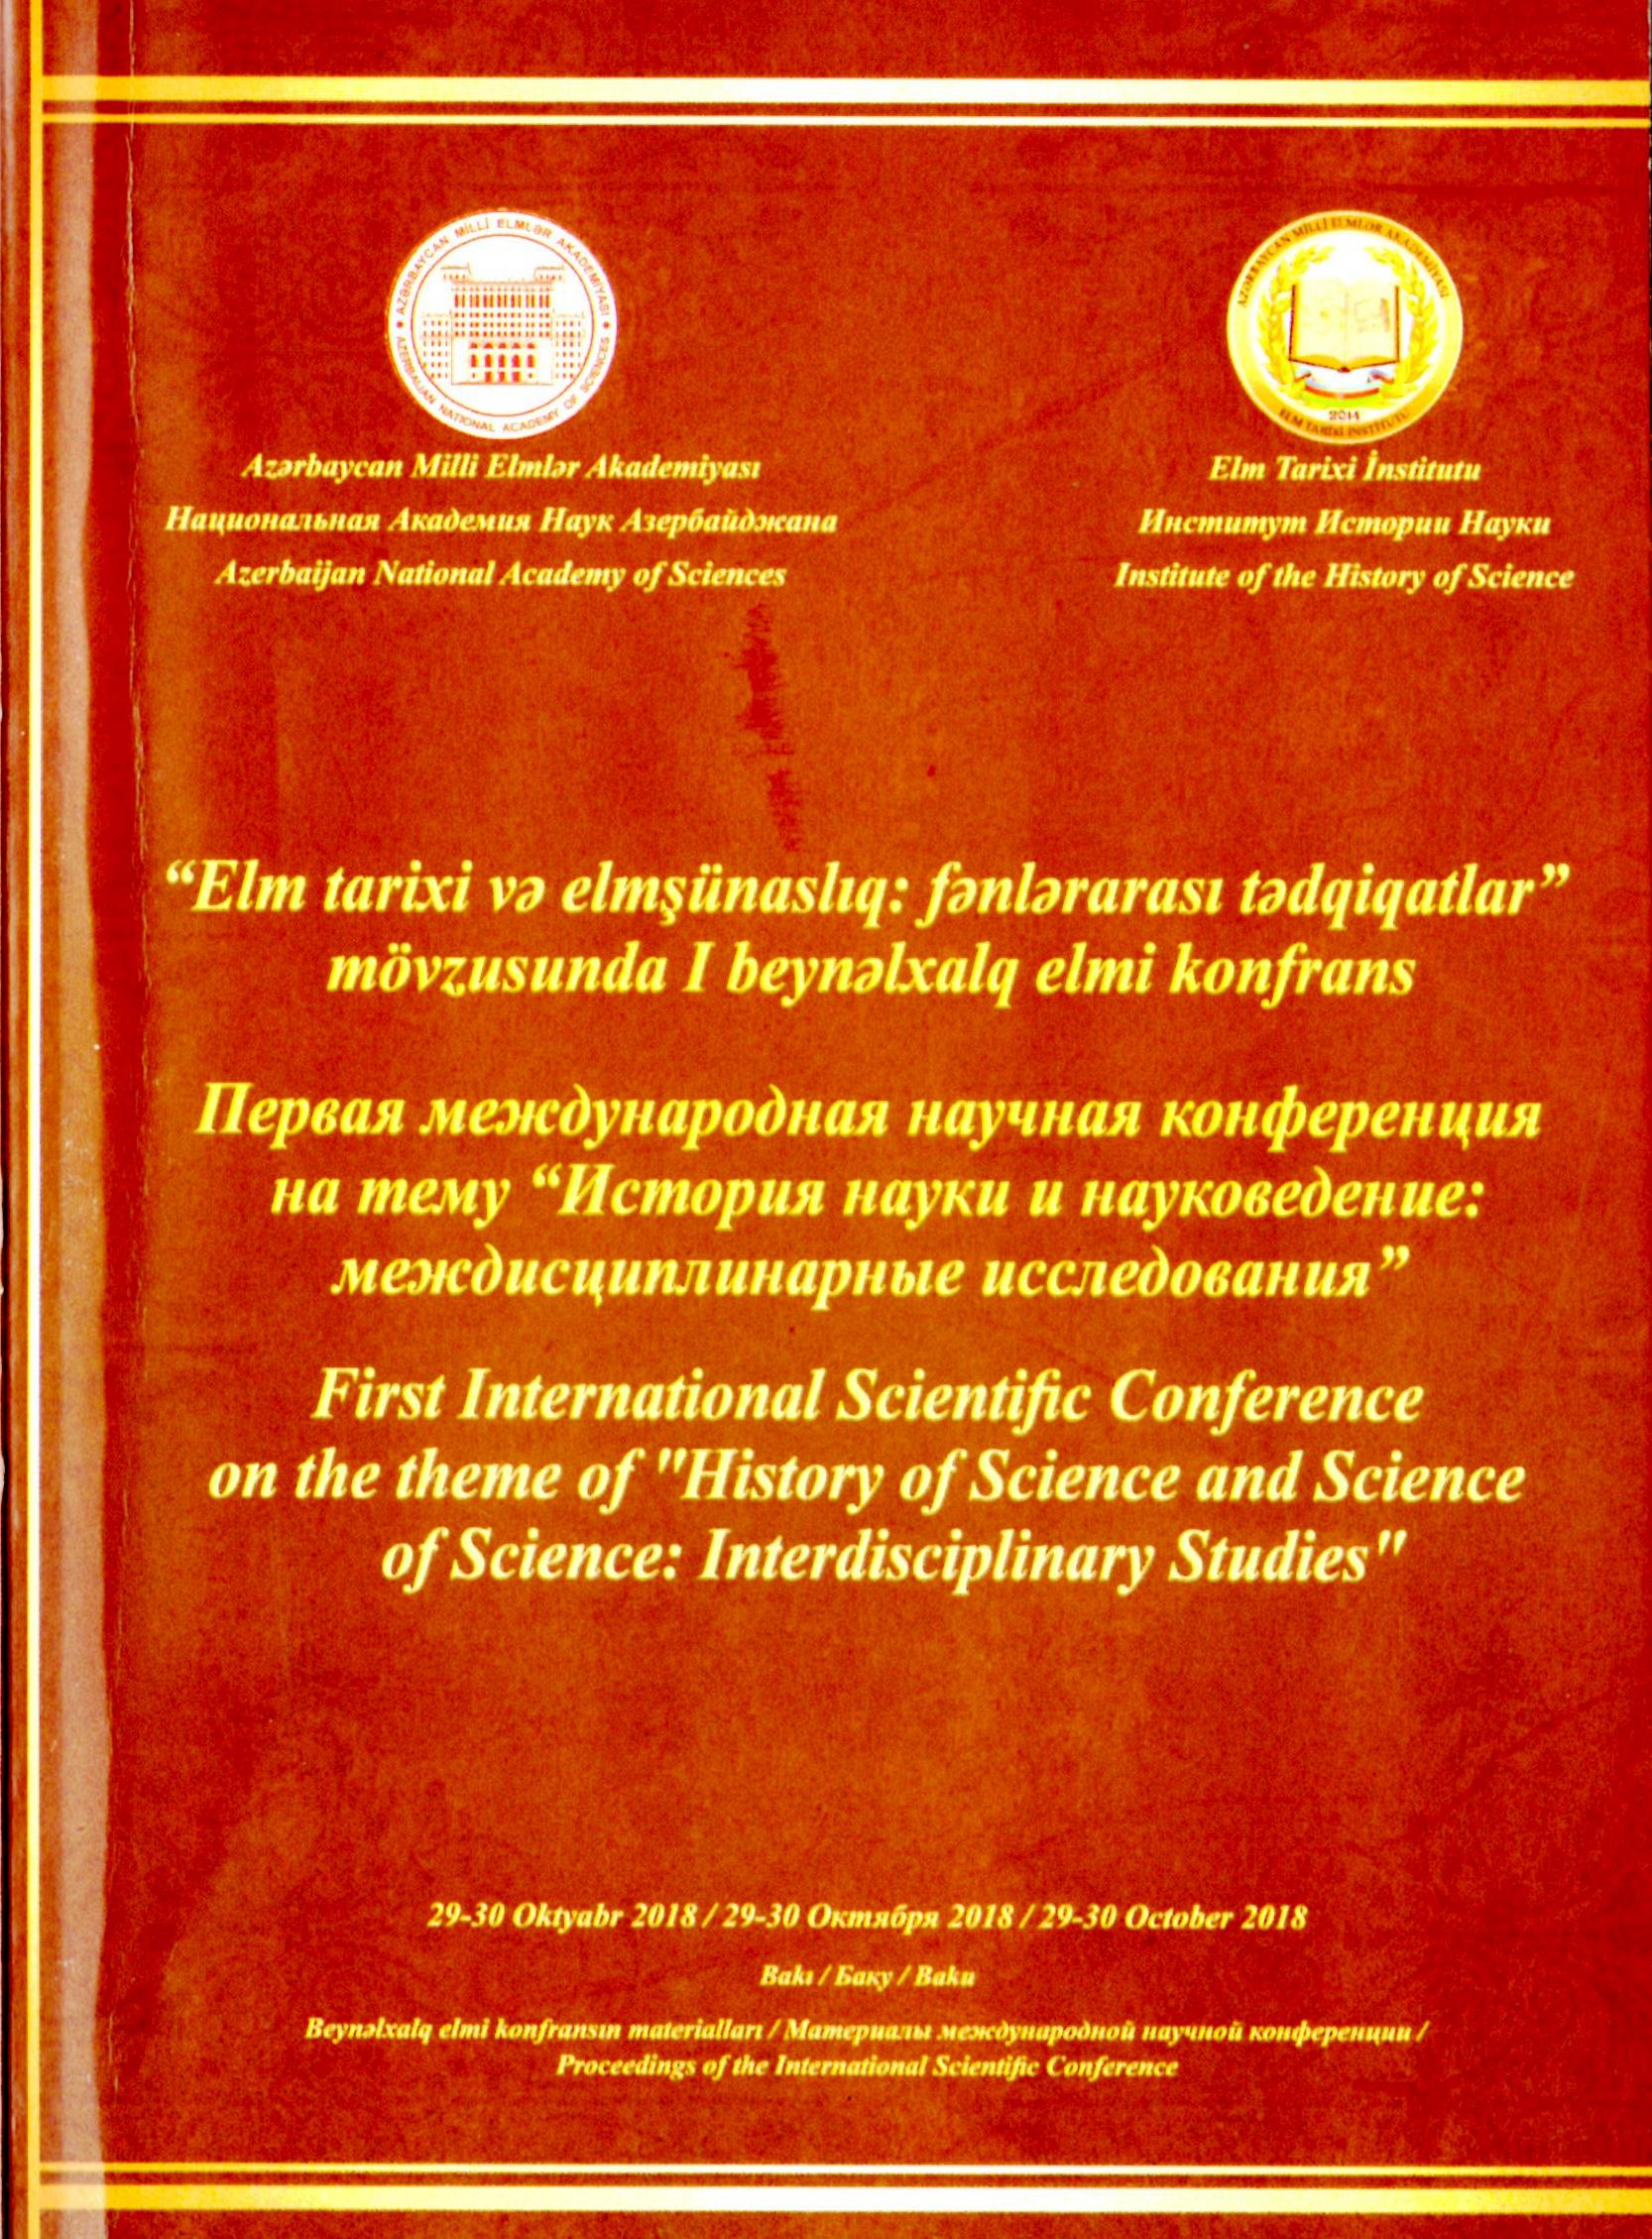 I International scientific conference on "History of Science and Science: Interdisciplinary Studies" was held in Baku, hosted by ANAS Institute of Science History on 29th - 30th of October  2018